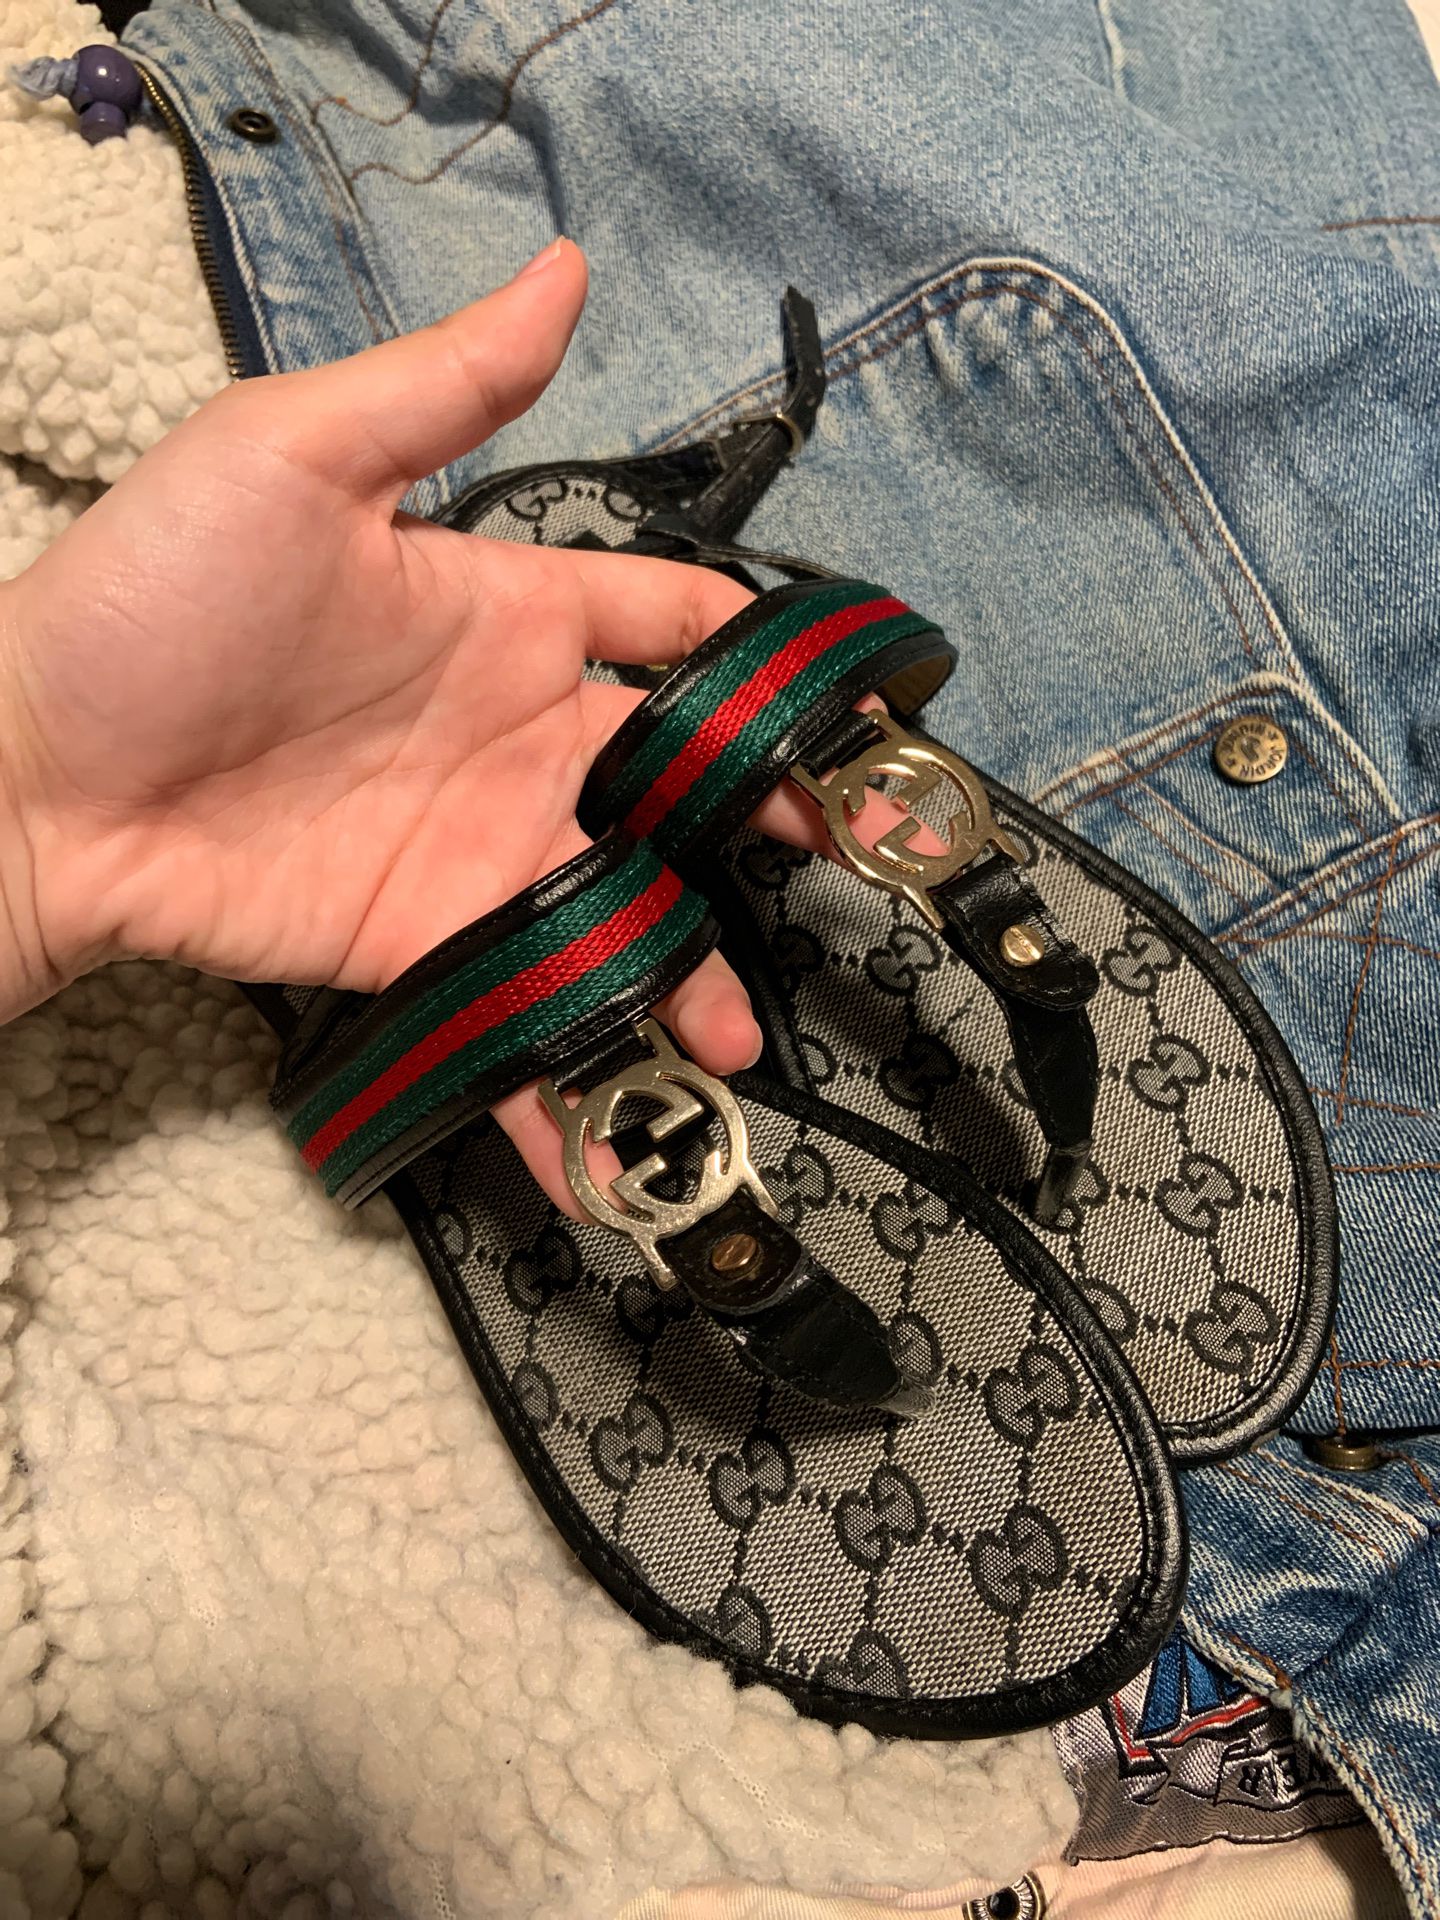 Authentic Gucci Thong Sandals (give me offers)